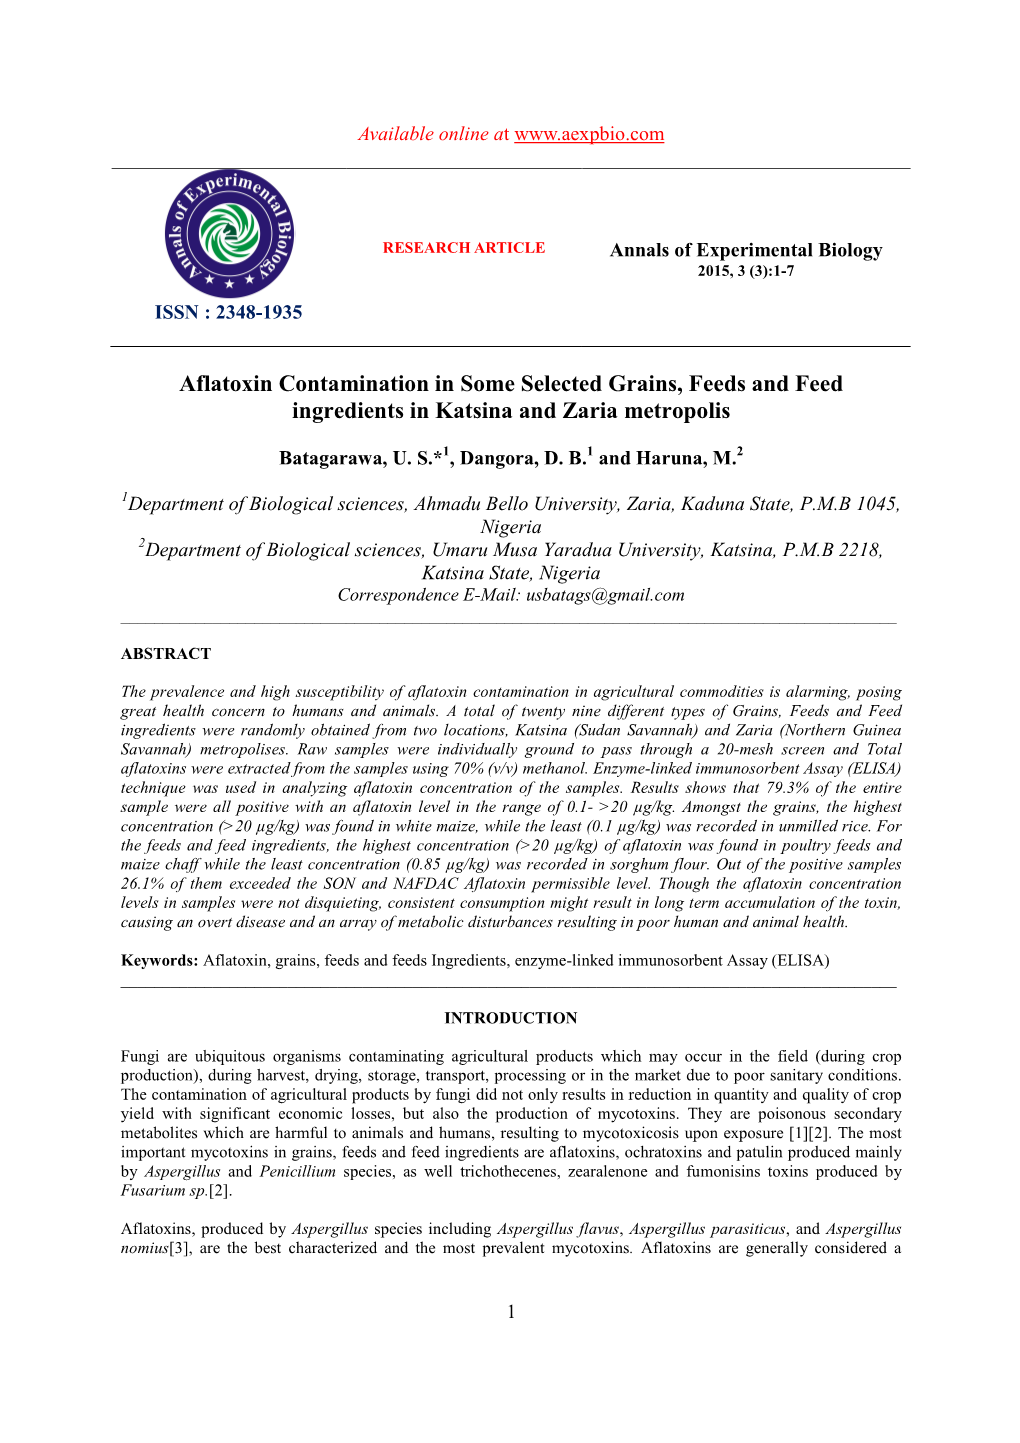 Aflatoxin Contamination in Some Selected Grains, Feeds and Feed Ingredients in Katsina and Zaria Metropolis